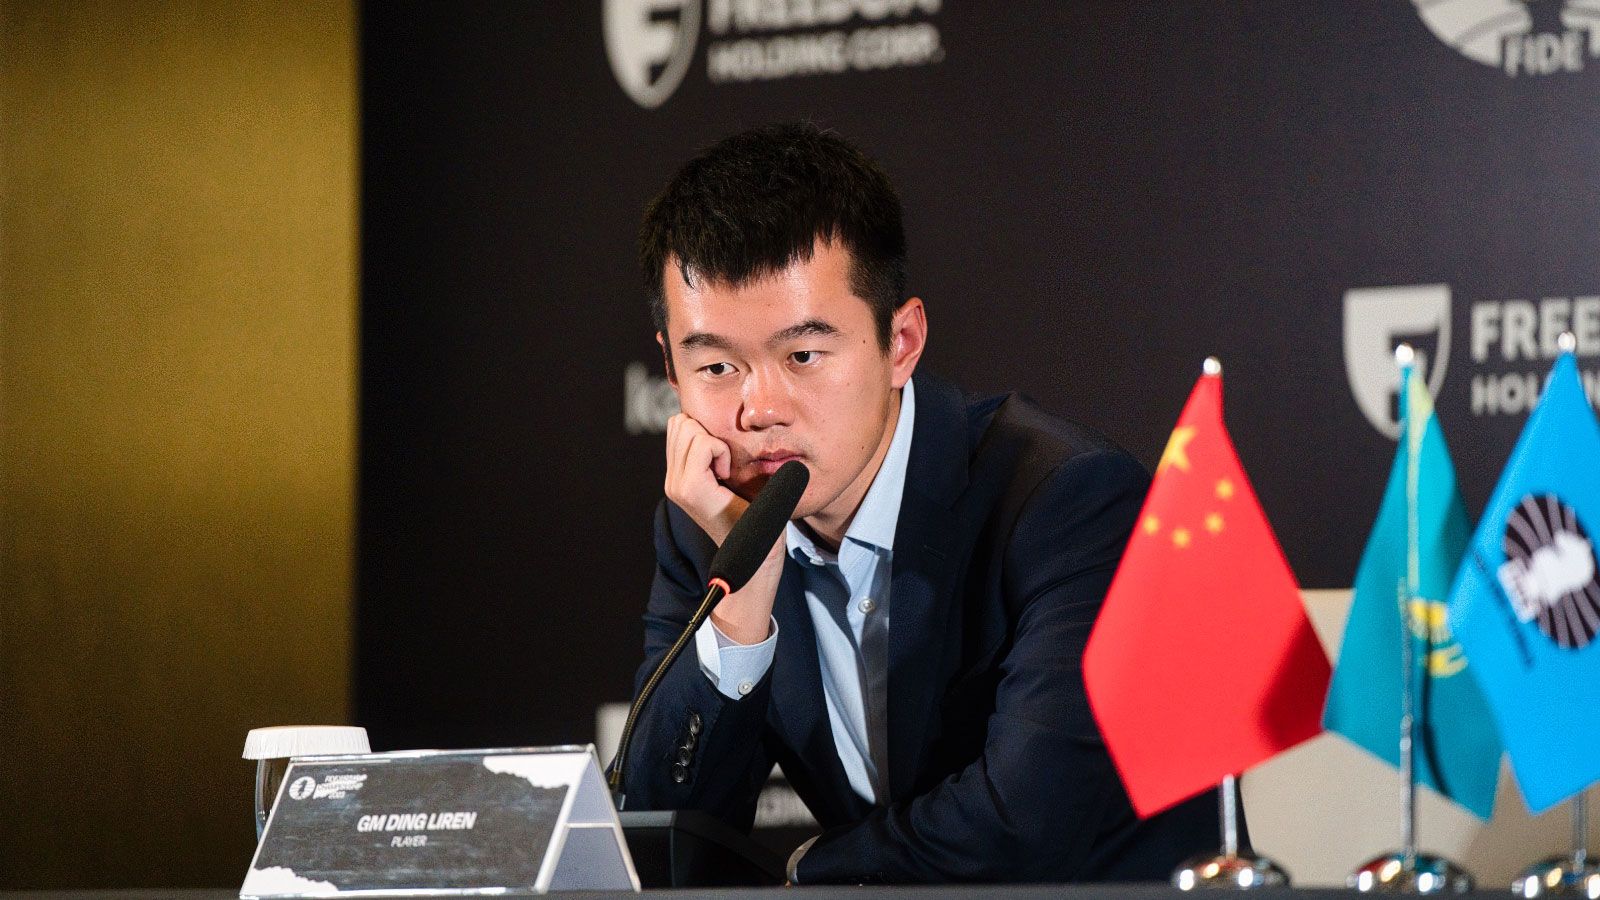 Superbet Chess Classic 2023 Round 5: Firouzja beats Ding Liren, MVL  outplays Nepomniachtchi Both players of the recently concluded World…